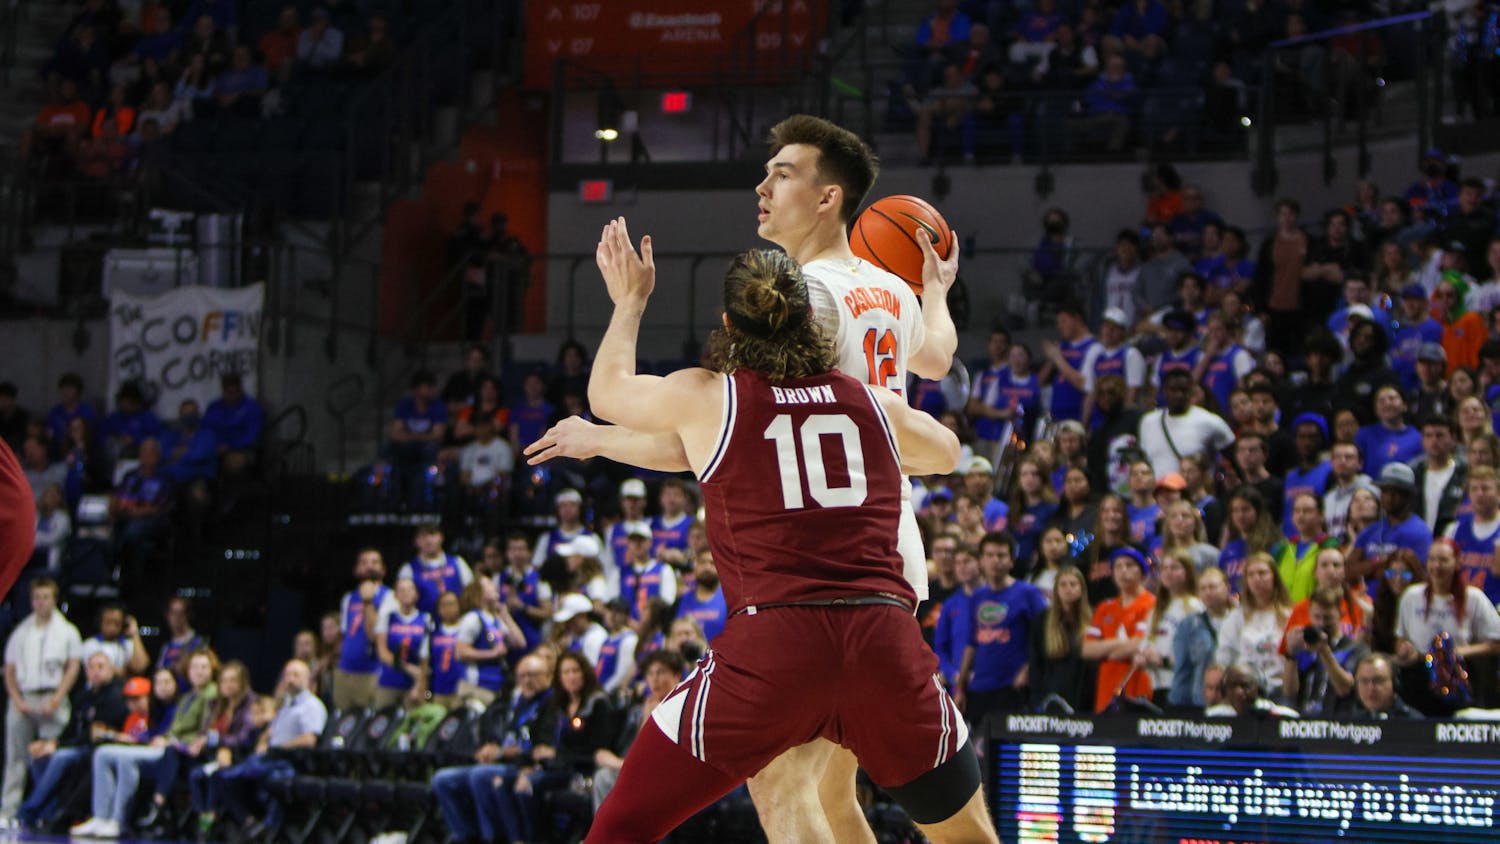 Florida forward Colin Castleton holds the ball in the Gators 81-60 victory against the South Carolina Gamecocks Wednesday, Jan. 25, 2023.